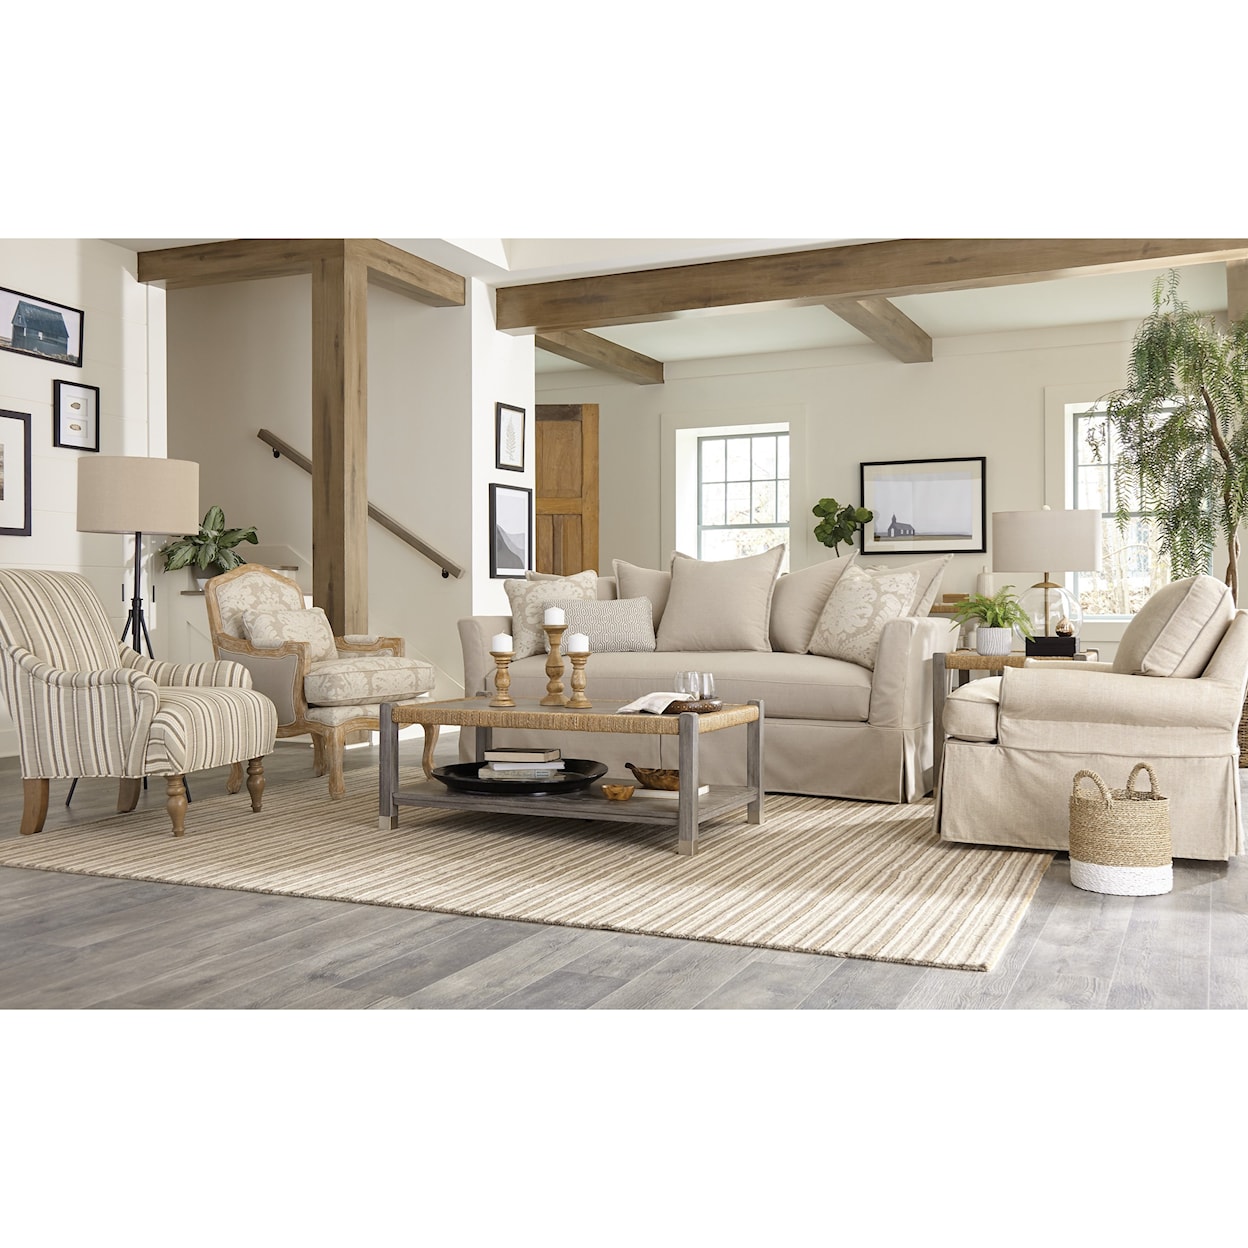 Craftmaster  Bench Seat Sofa with Innerspring Sleeper